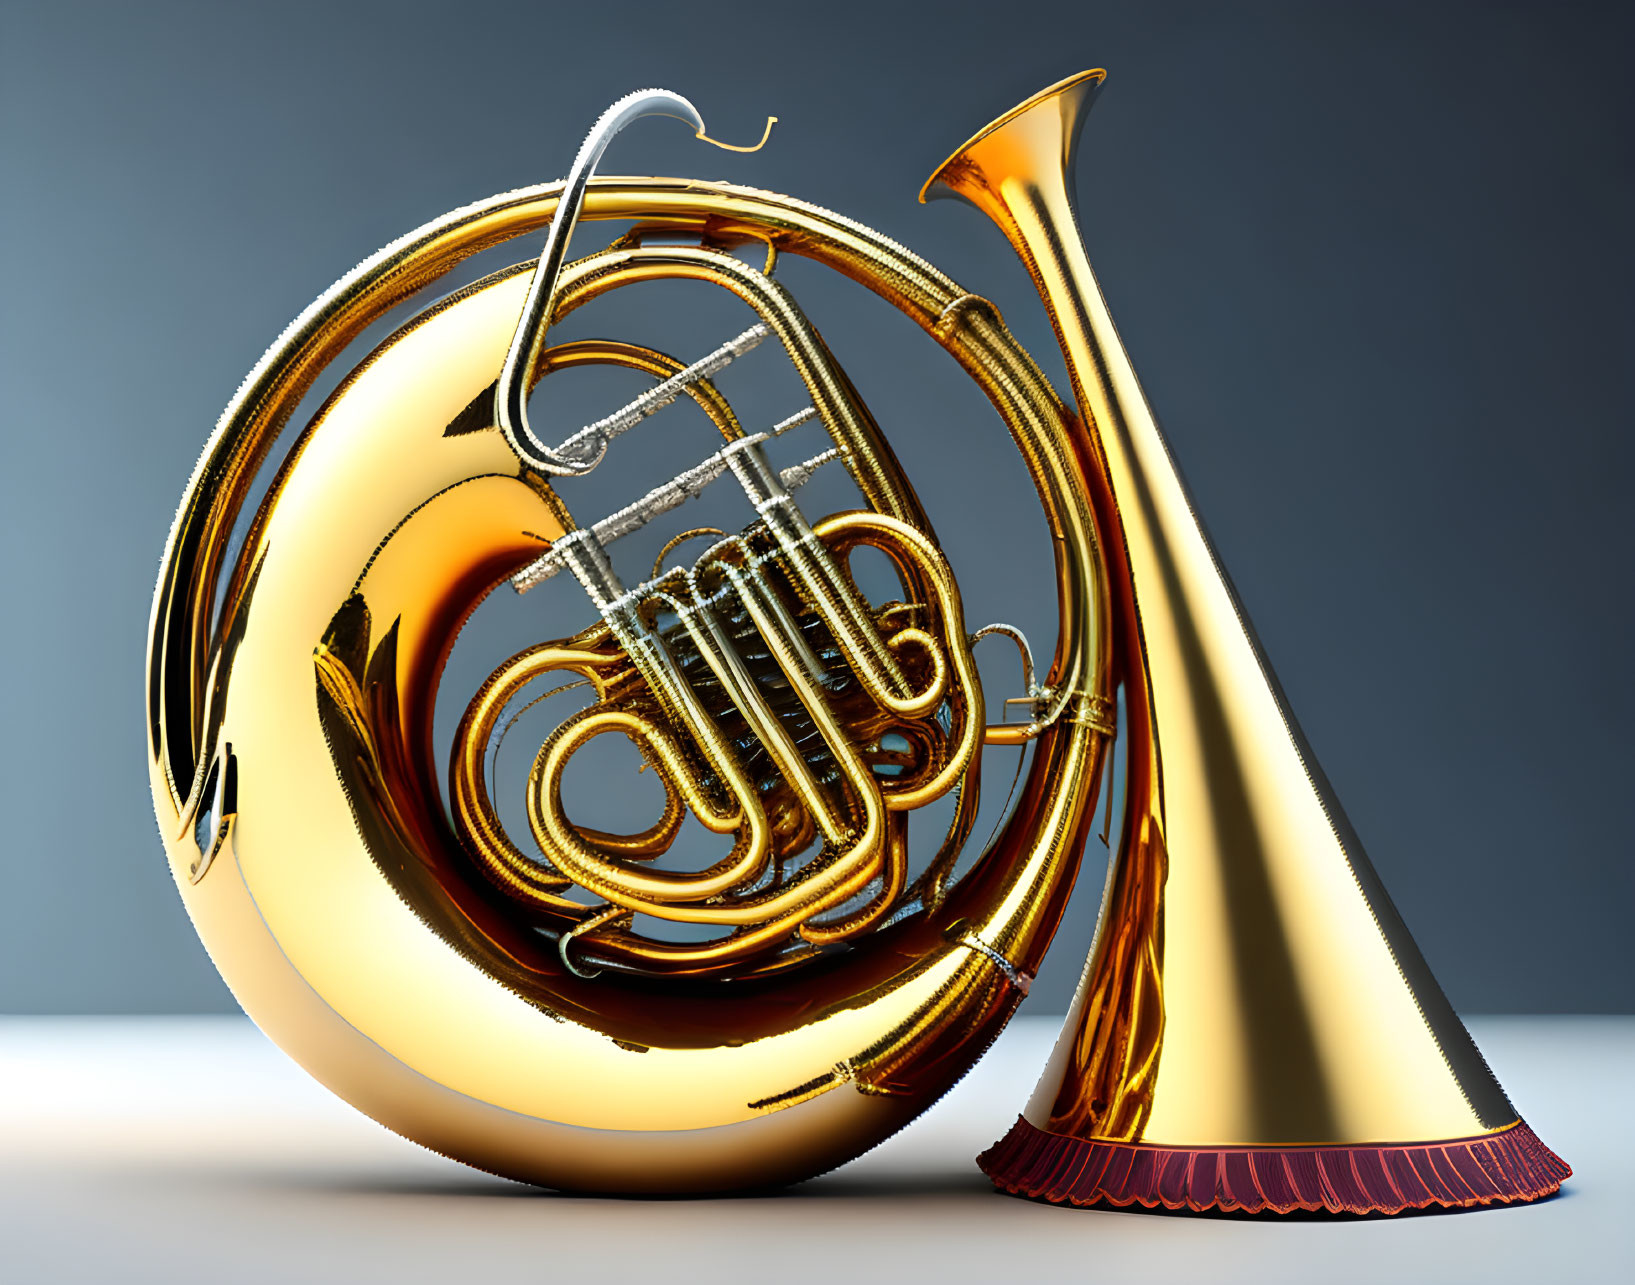 Shiny golden French horn on blue-gray background